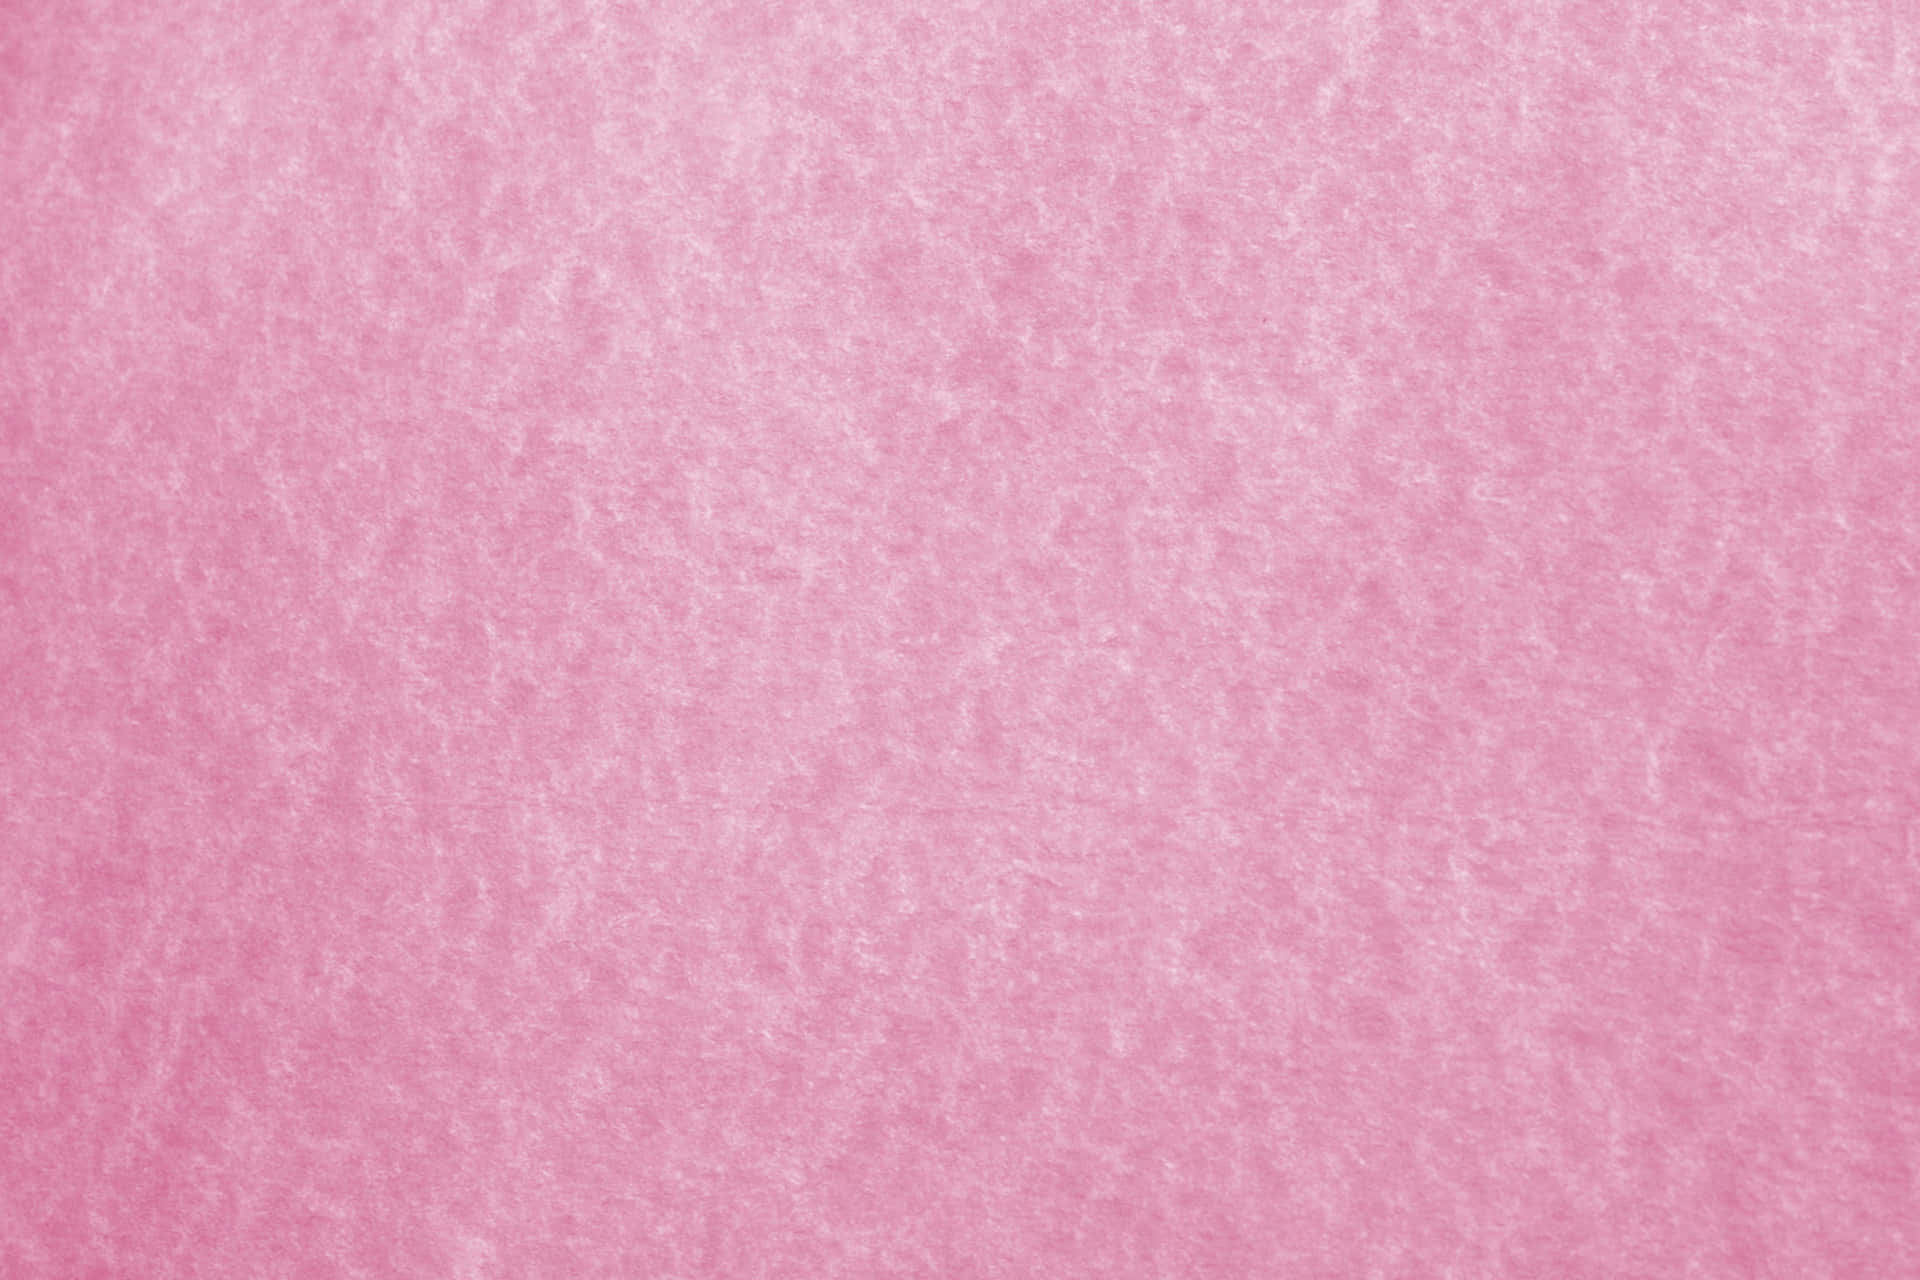 Captivating Pink Texture Background Wallpaper